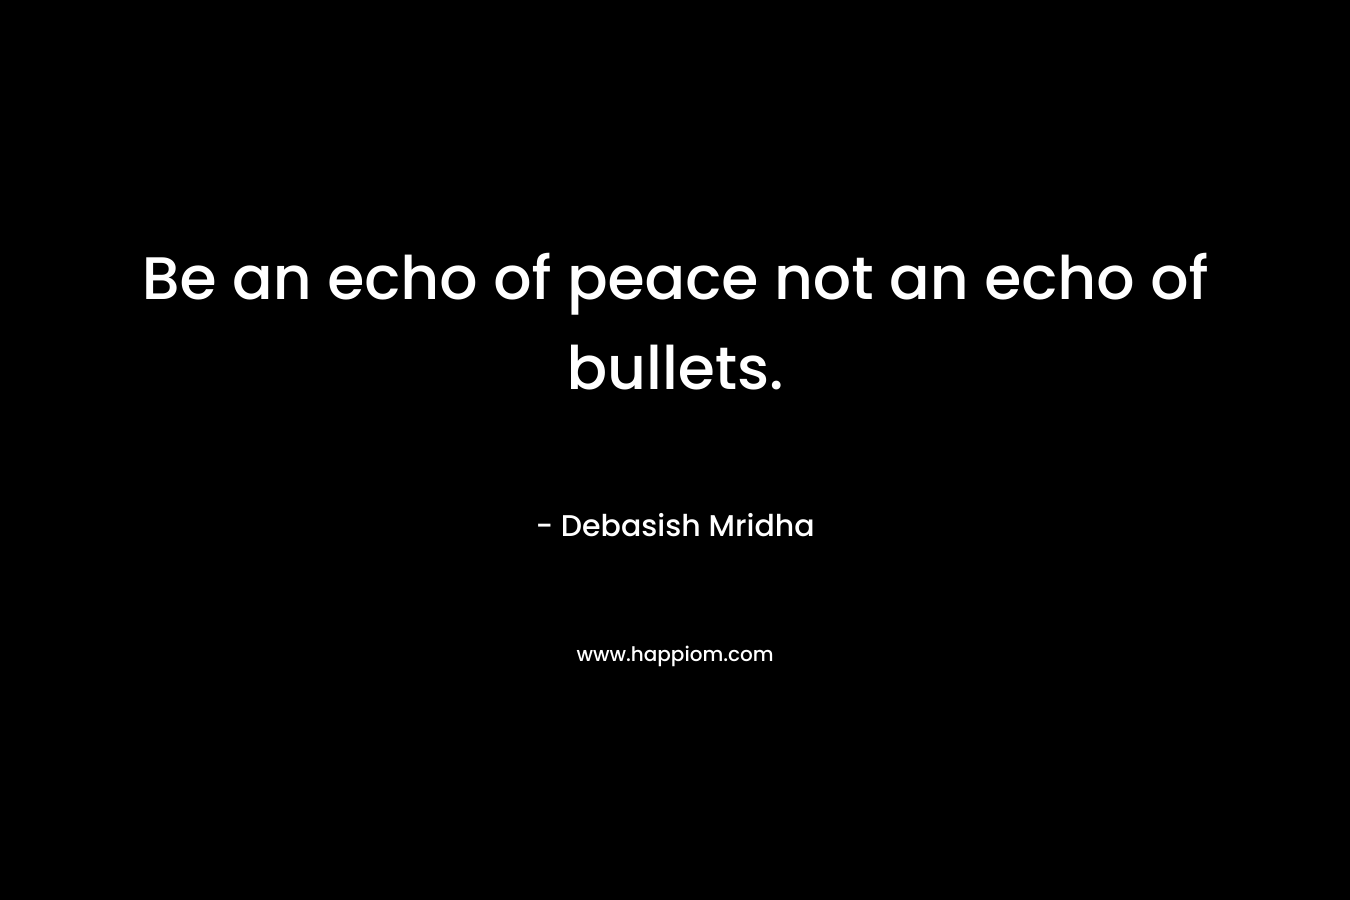 Be an echo of peace not an echo of bullets.